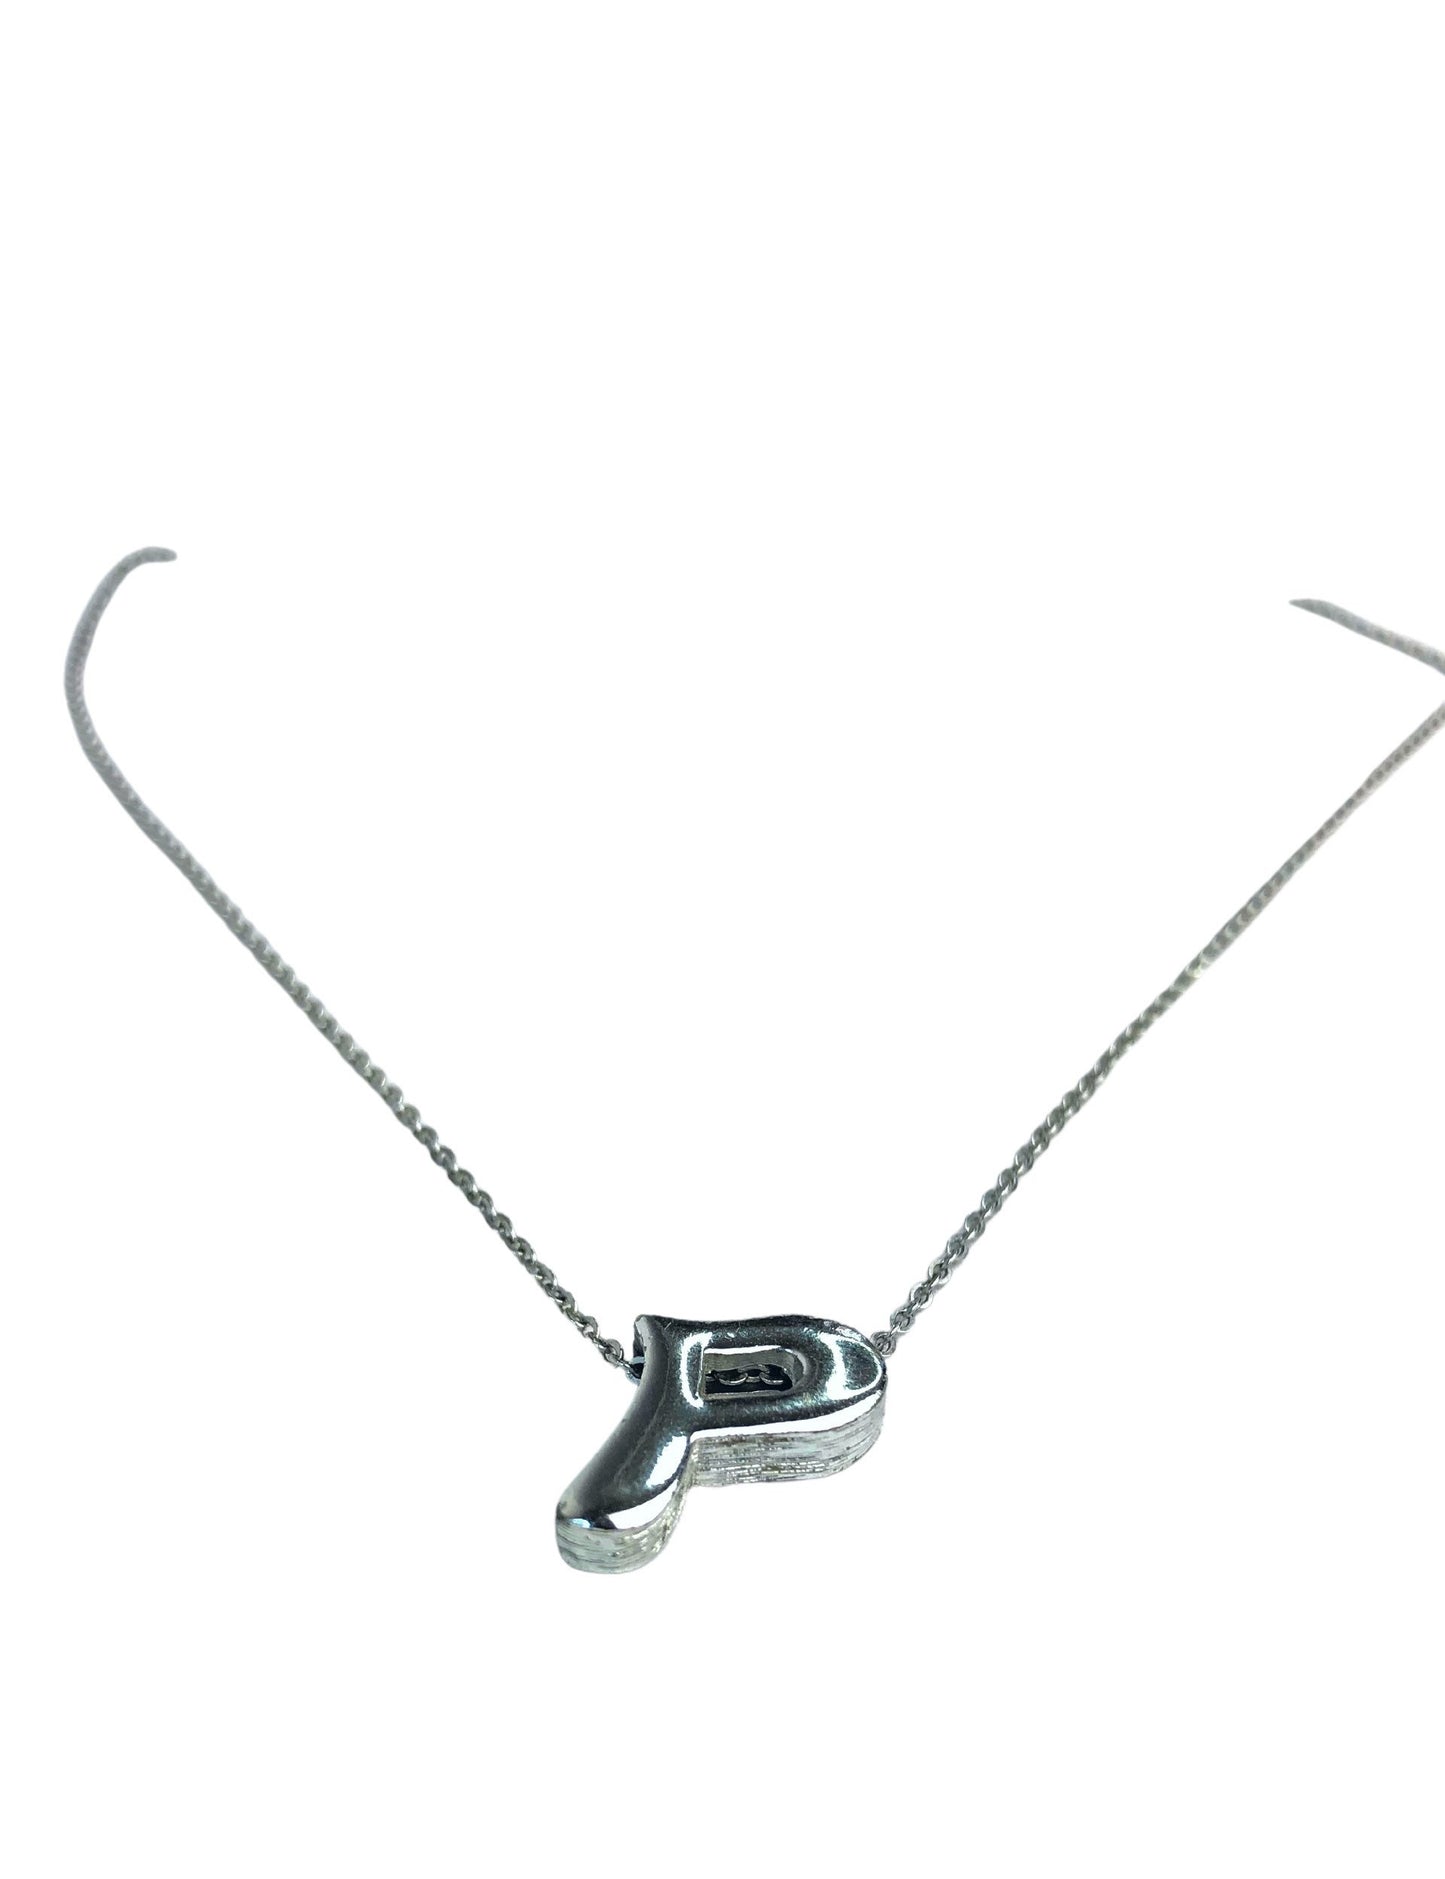 80’s “P” Initial Silver Plated 9.5” Choker Necklace